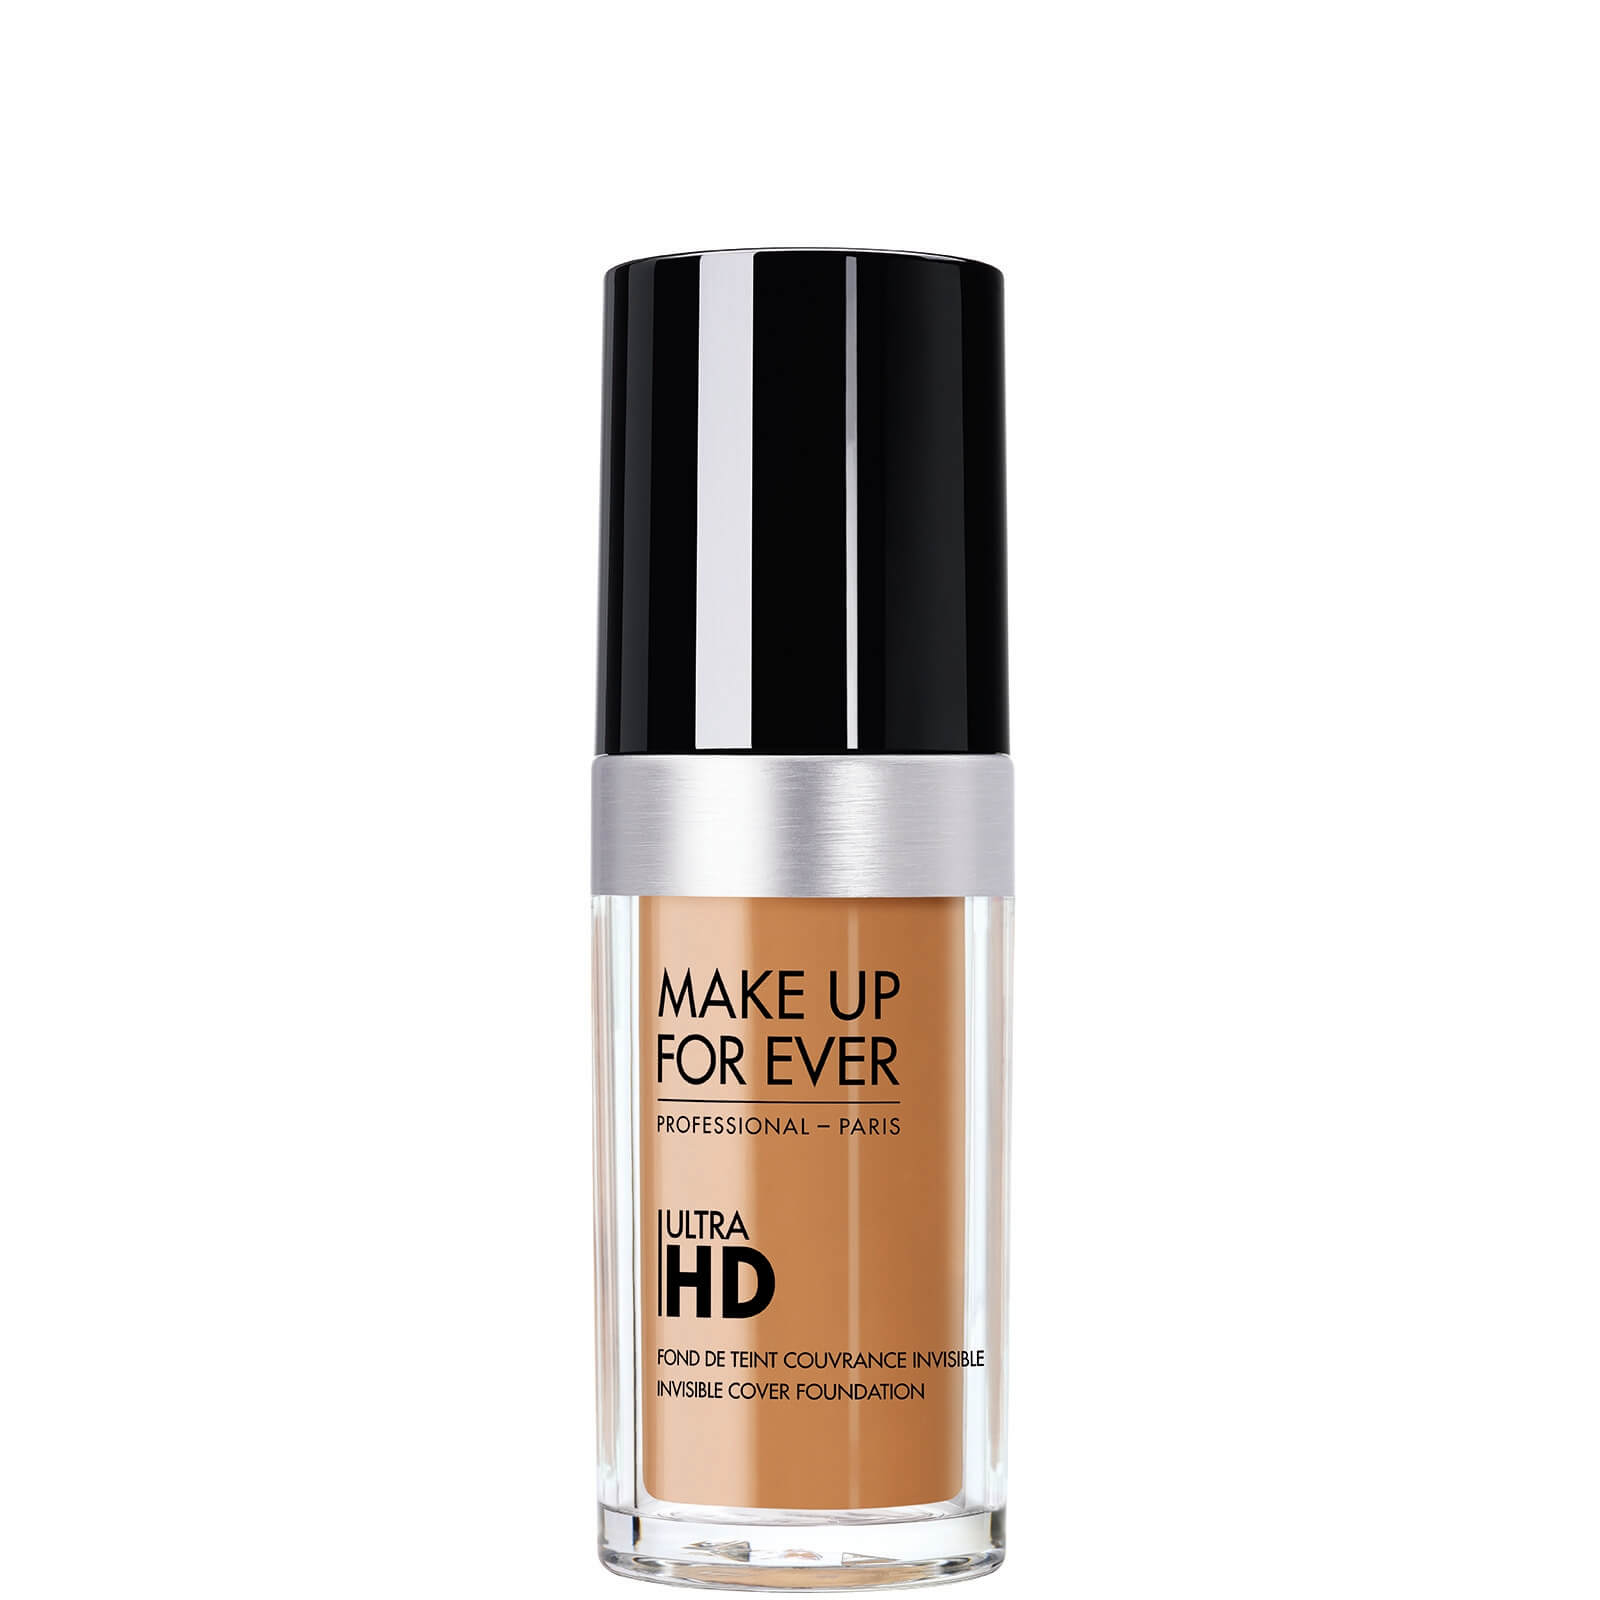 MAKE UP FOR EVER ultra Hd Invisible Cover Foundation 30ml (Various Shades) - - Y435 Caramel